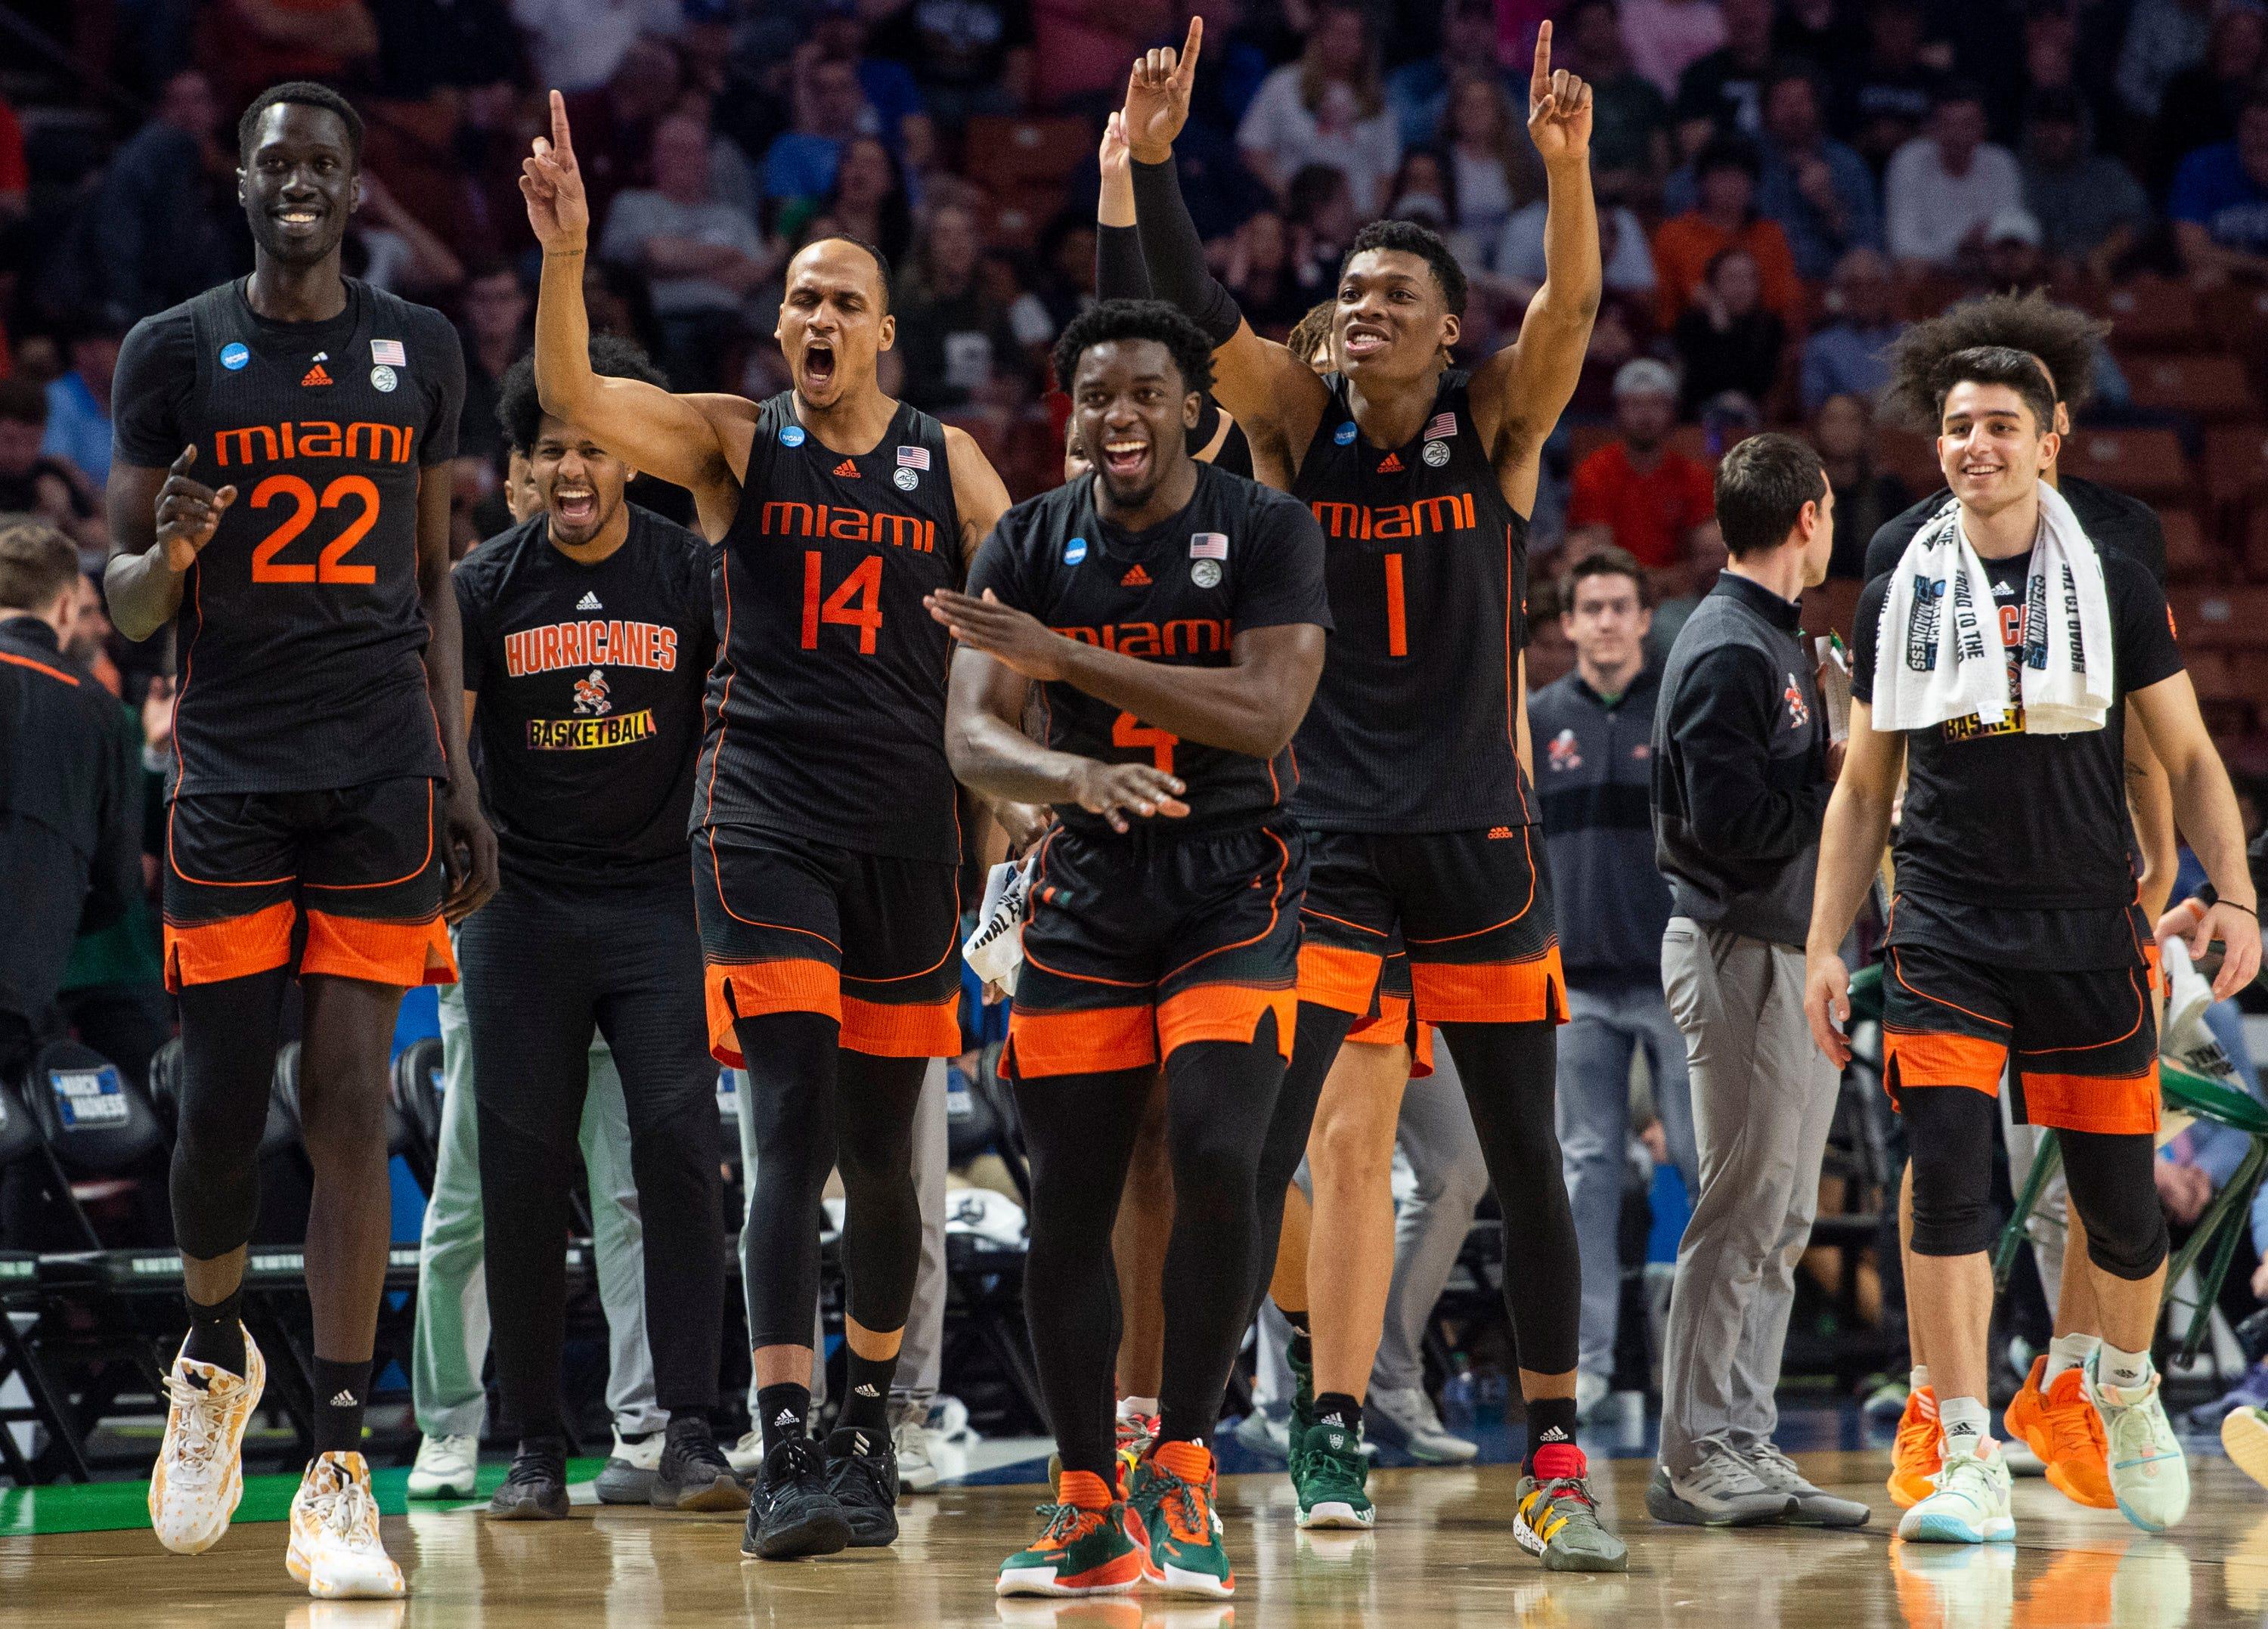 Miami NCAA Tournament History: National Championships, All-Time Record, Best March Madness Results & More